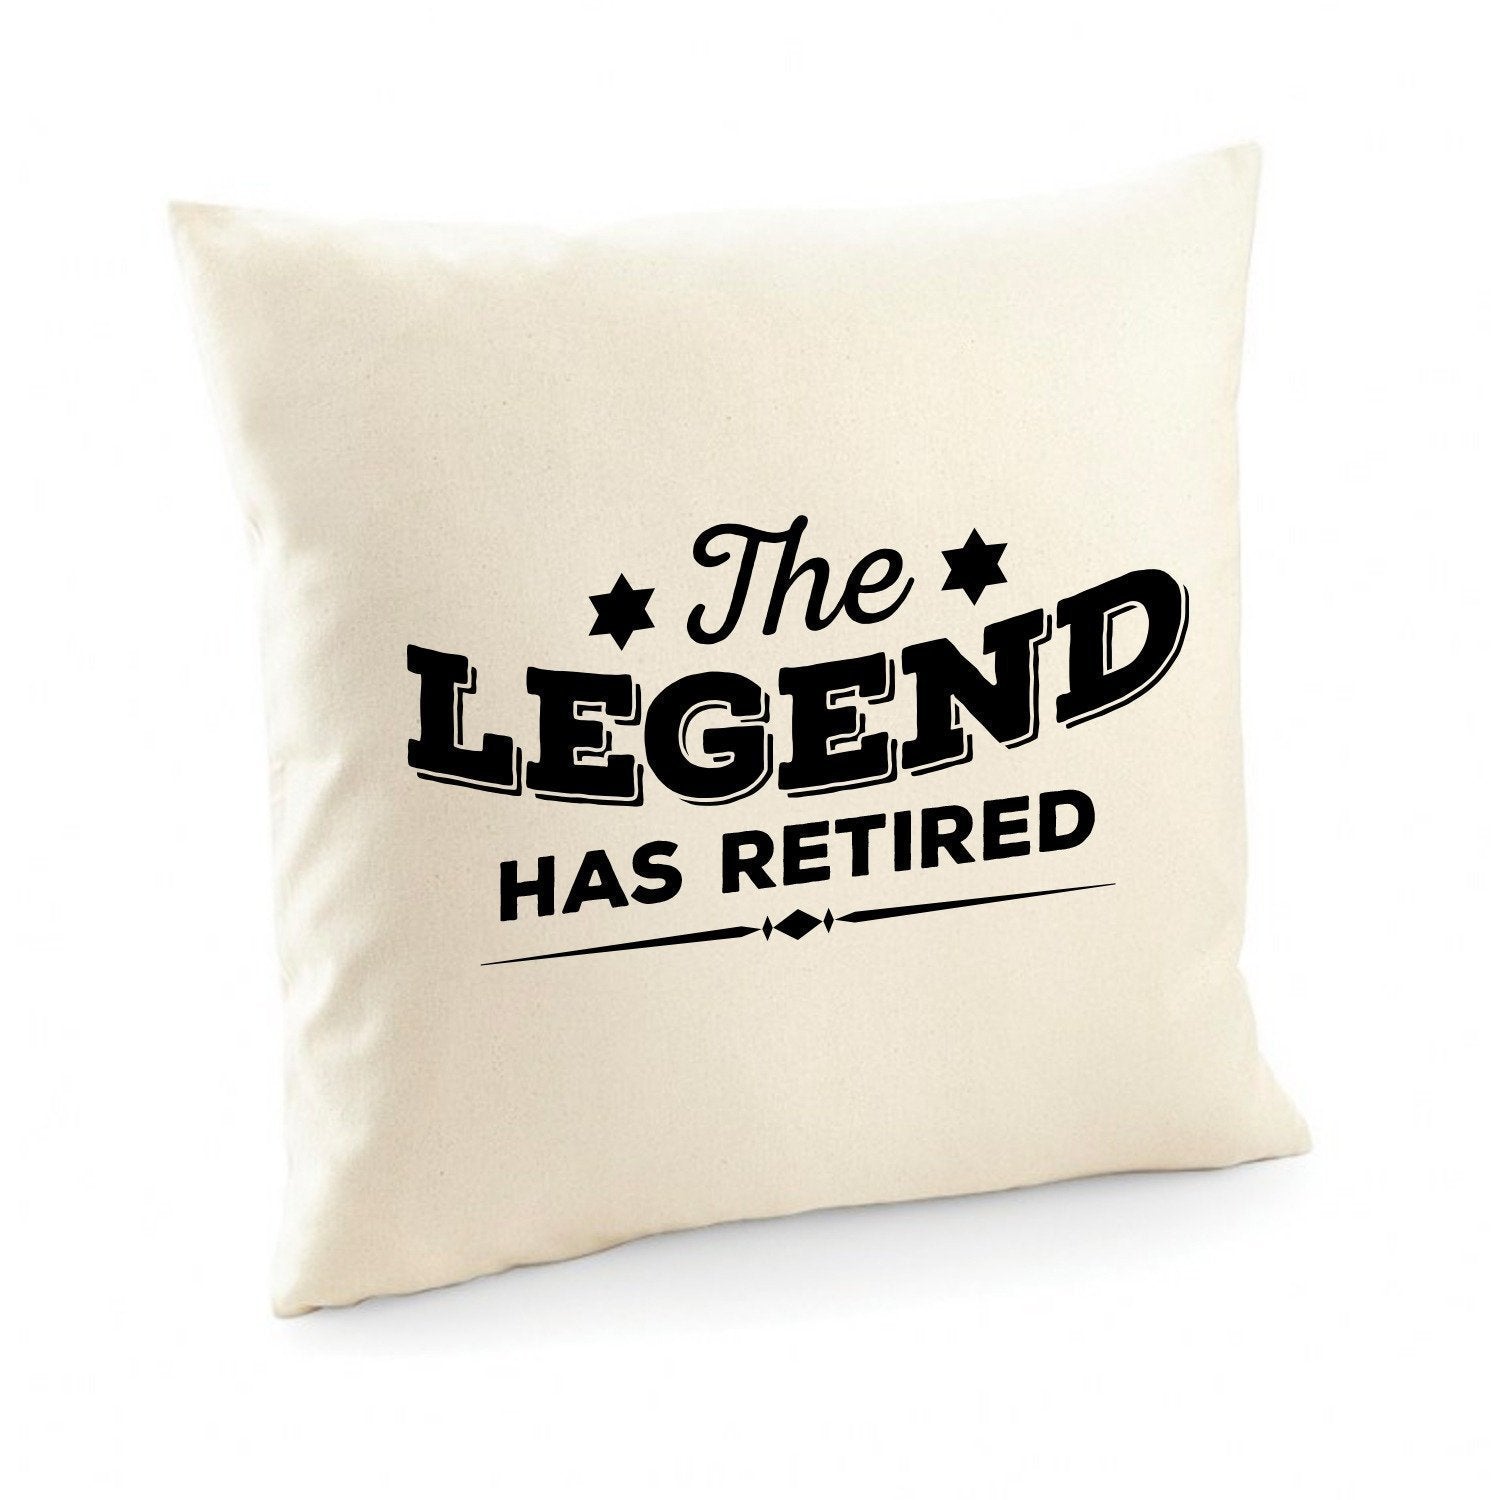 The Legend Has Retired Cushion Cover, Retirement Gift For Him Or Her, Leaving Job Gift